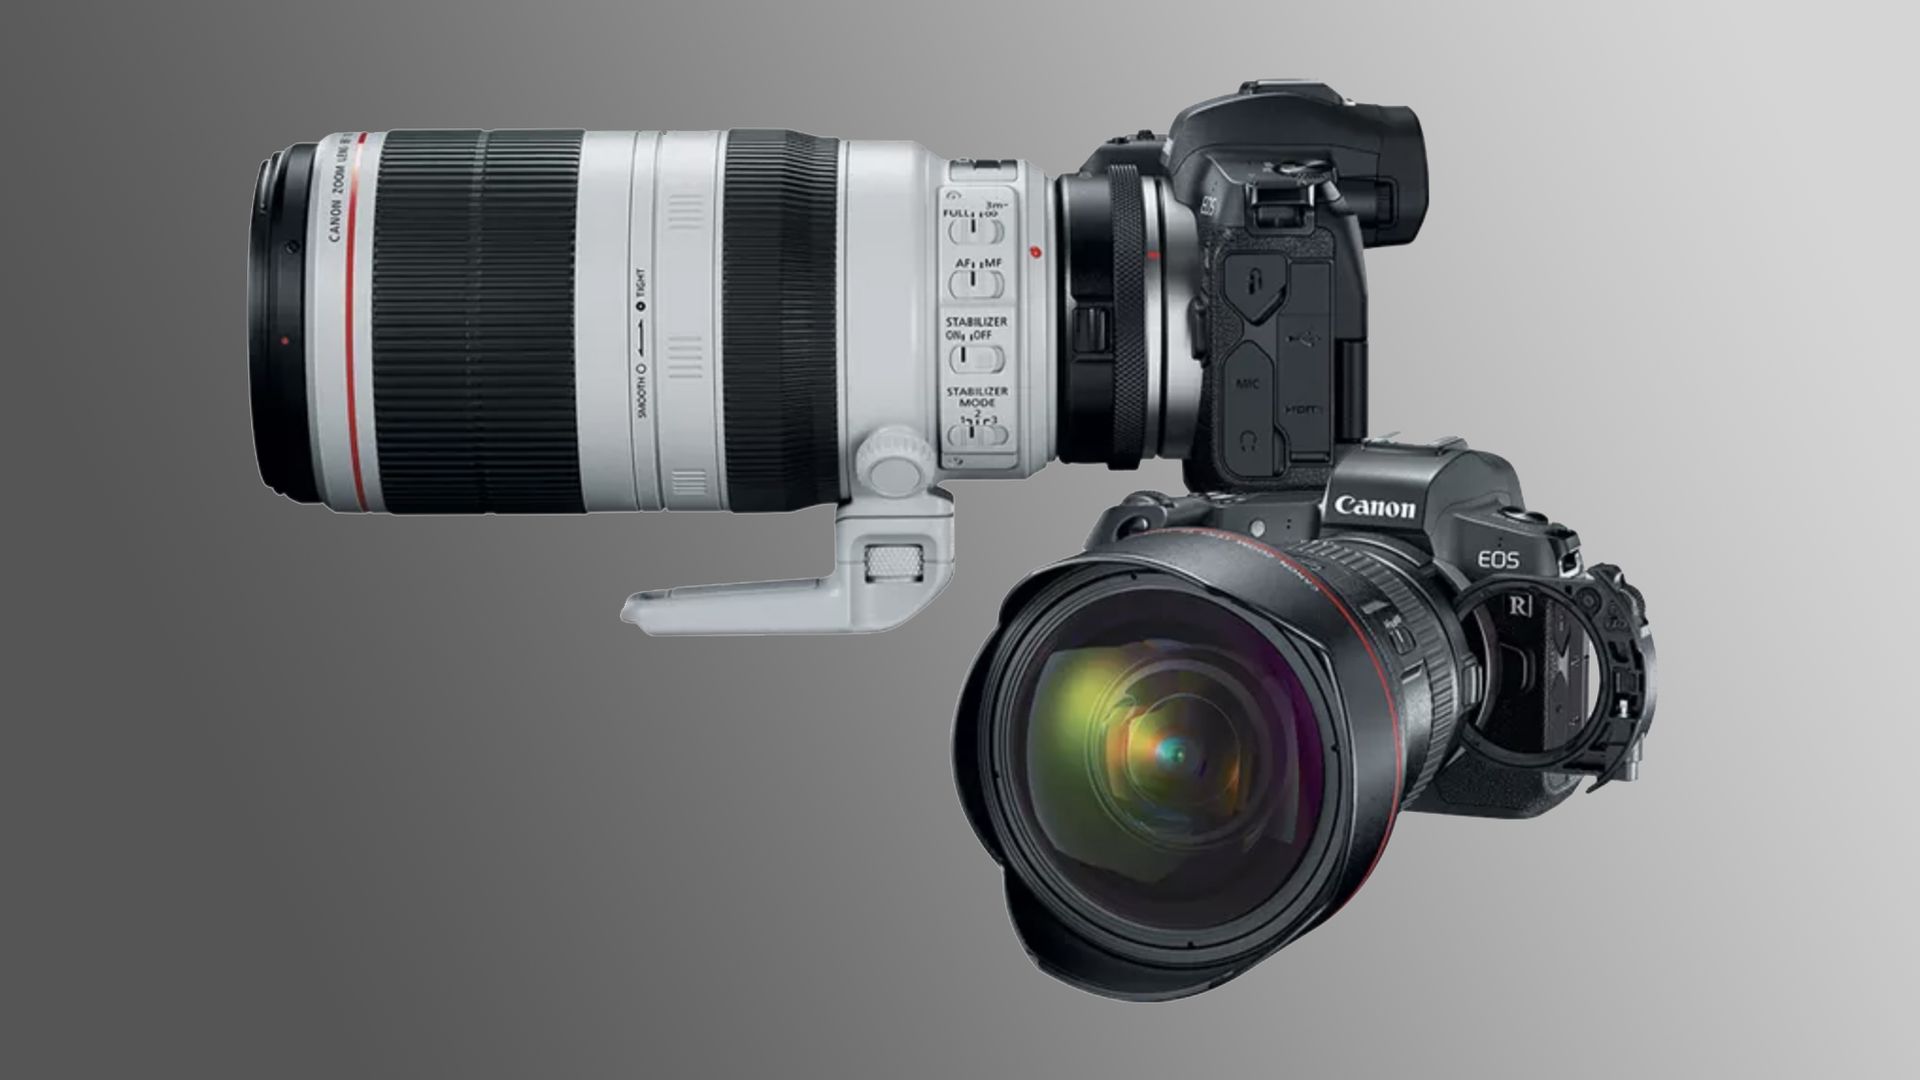 Save an enormous 400 with Canon's latest rebates Digital Camera World